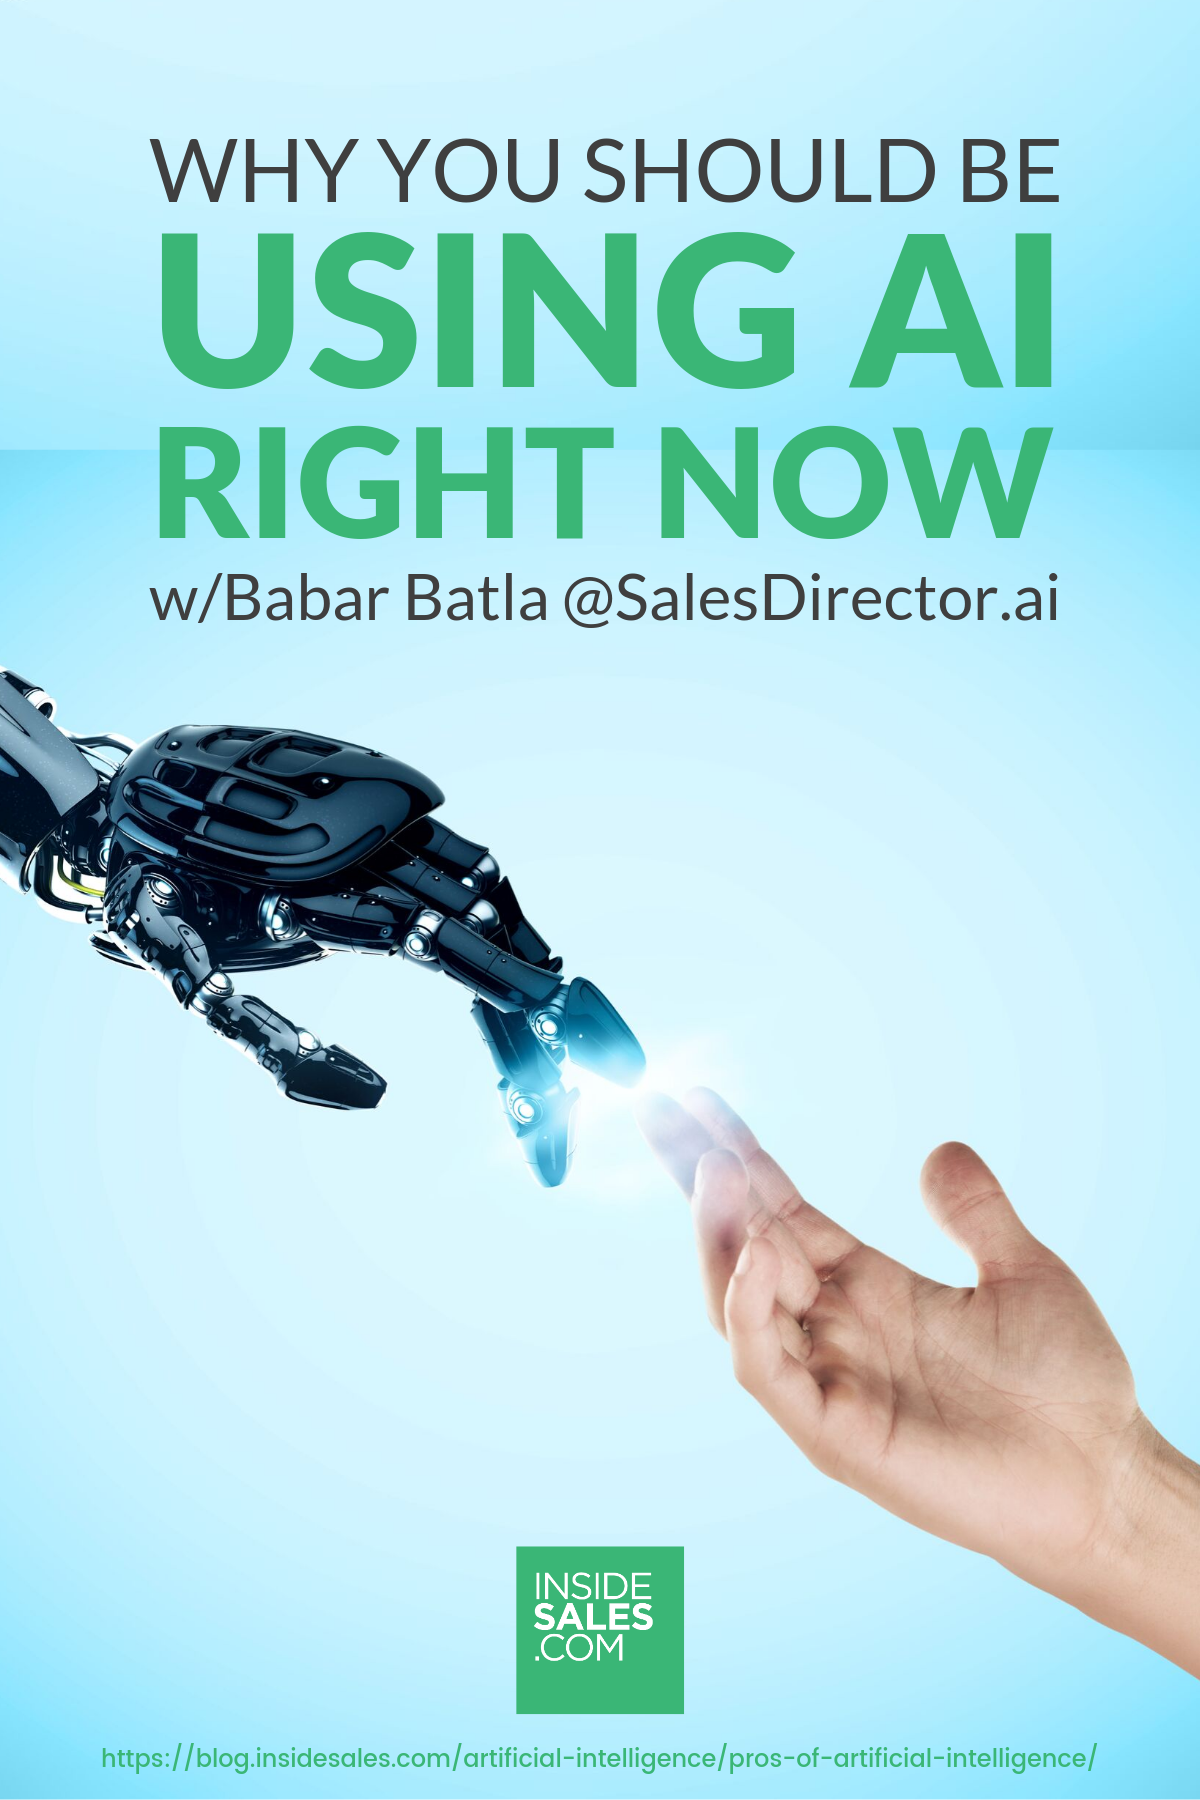 Why You Should Be Using AI Right Now w/Babar Batla @SalesDirector.ai https://www.insidesales.com/blog/artificial-intelligence/pros-of-artificial-intelligence/